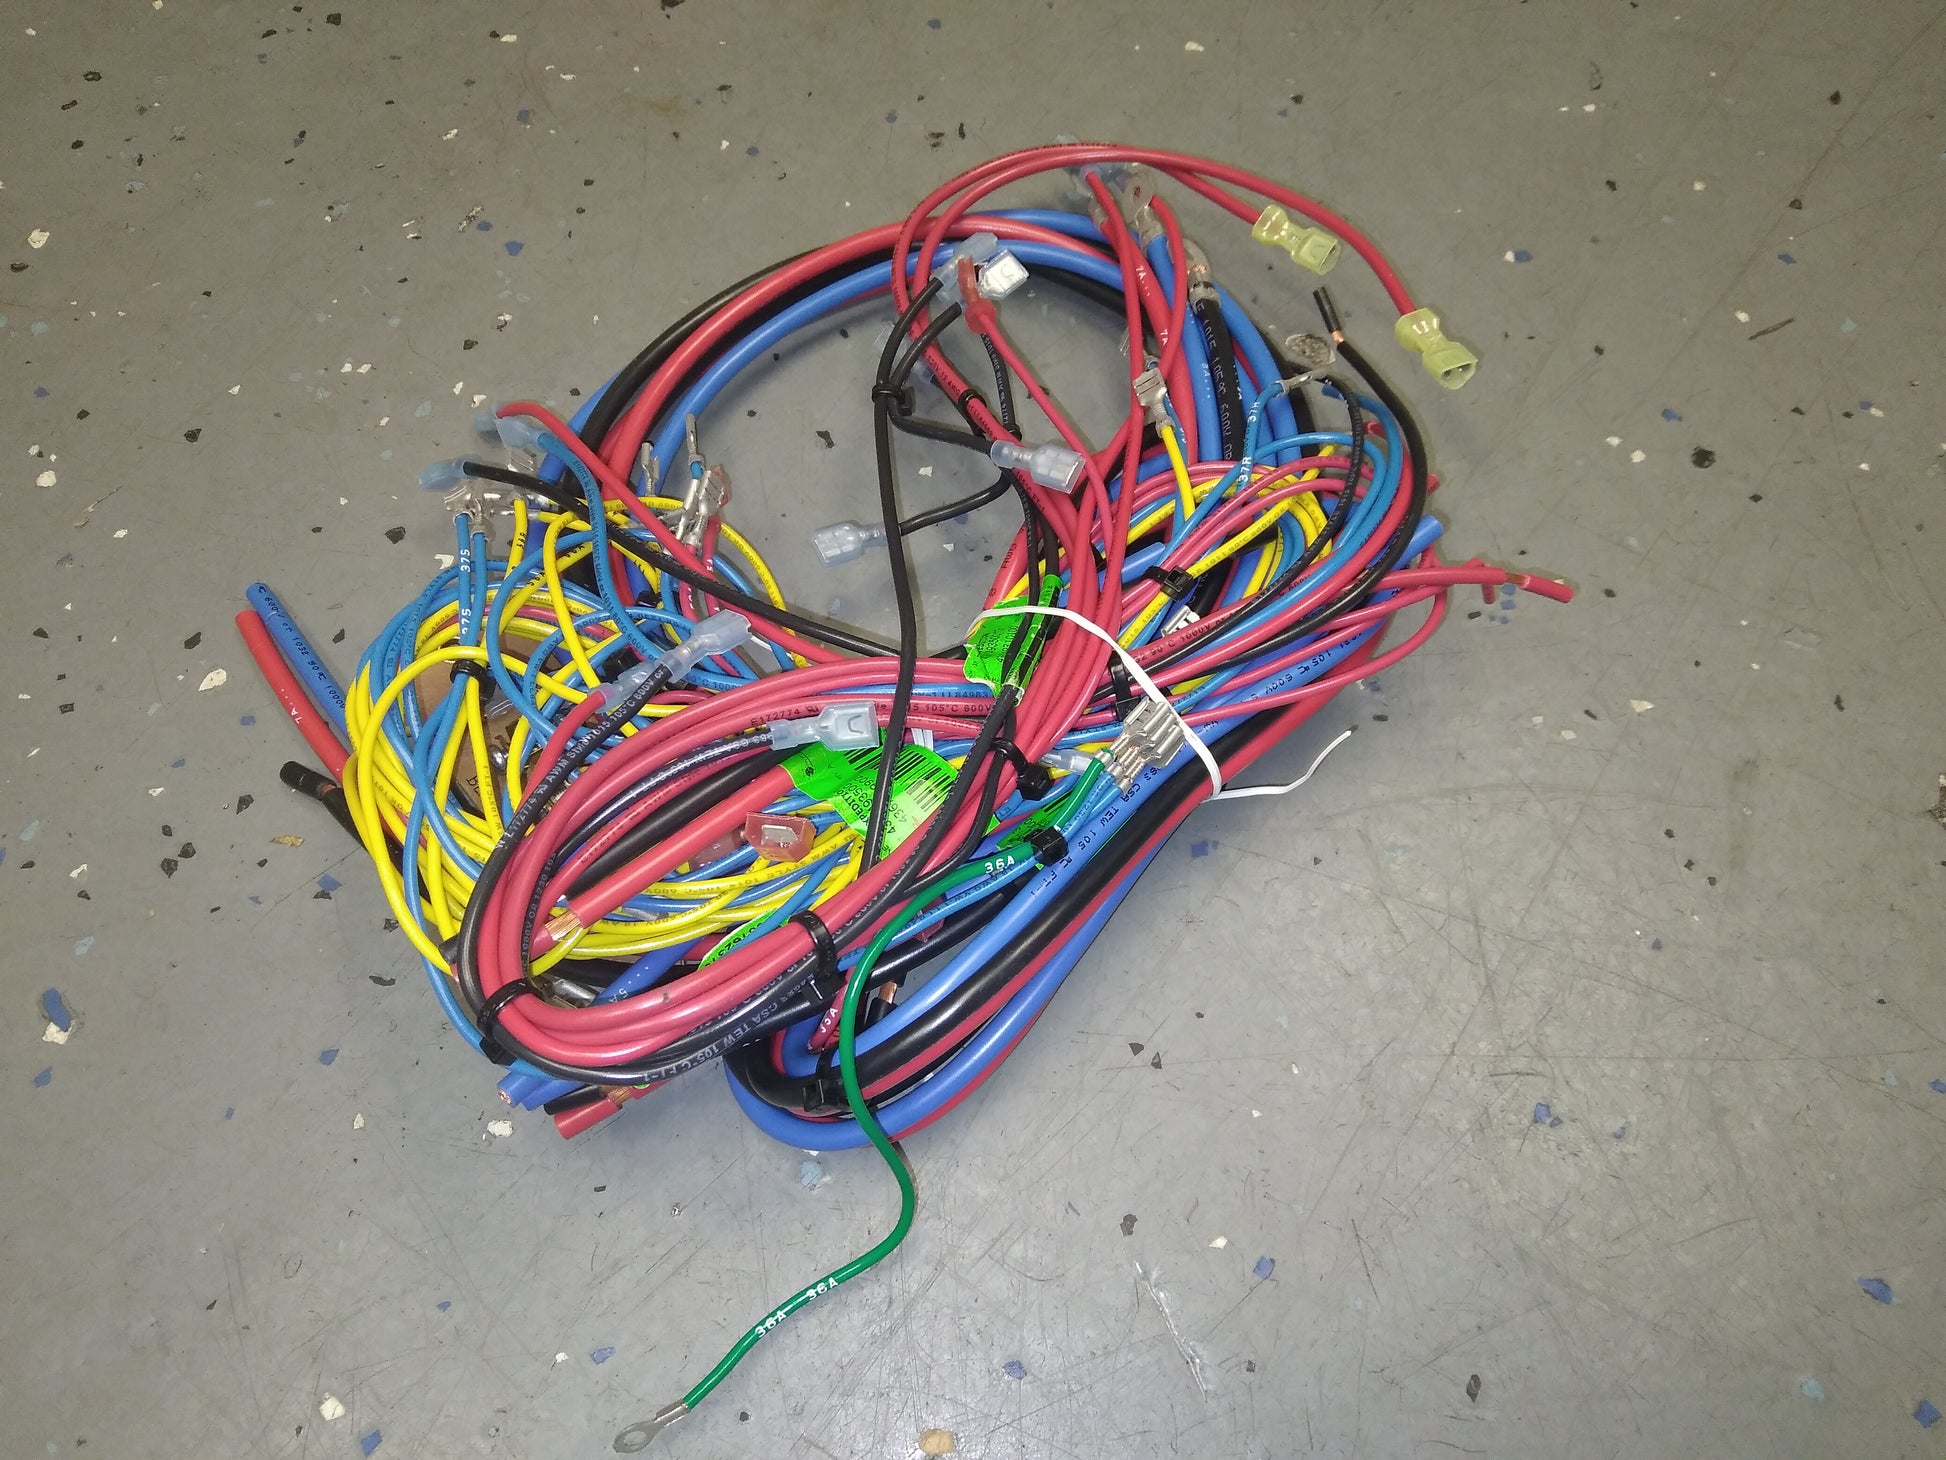 WIRING HARNESS FOR ELECTRO MECHANICAL CONTROLS